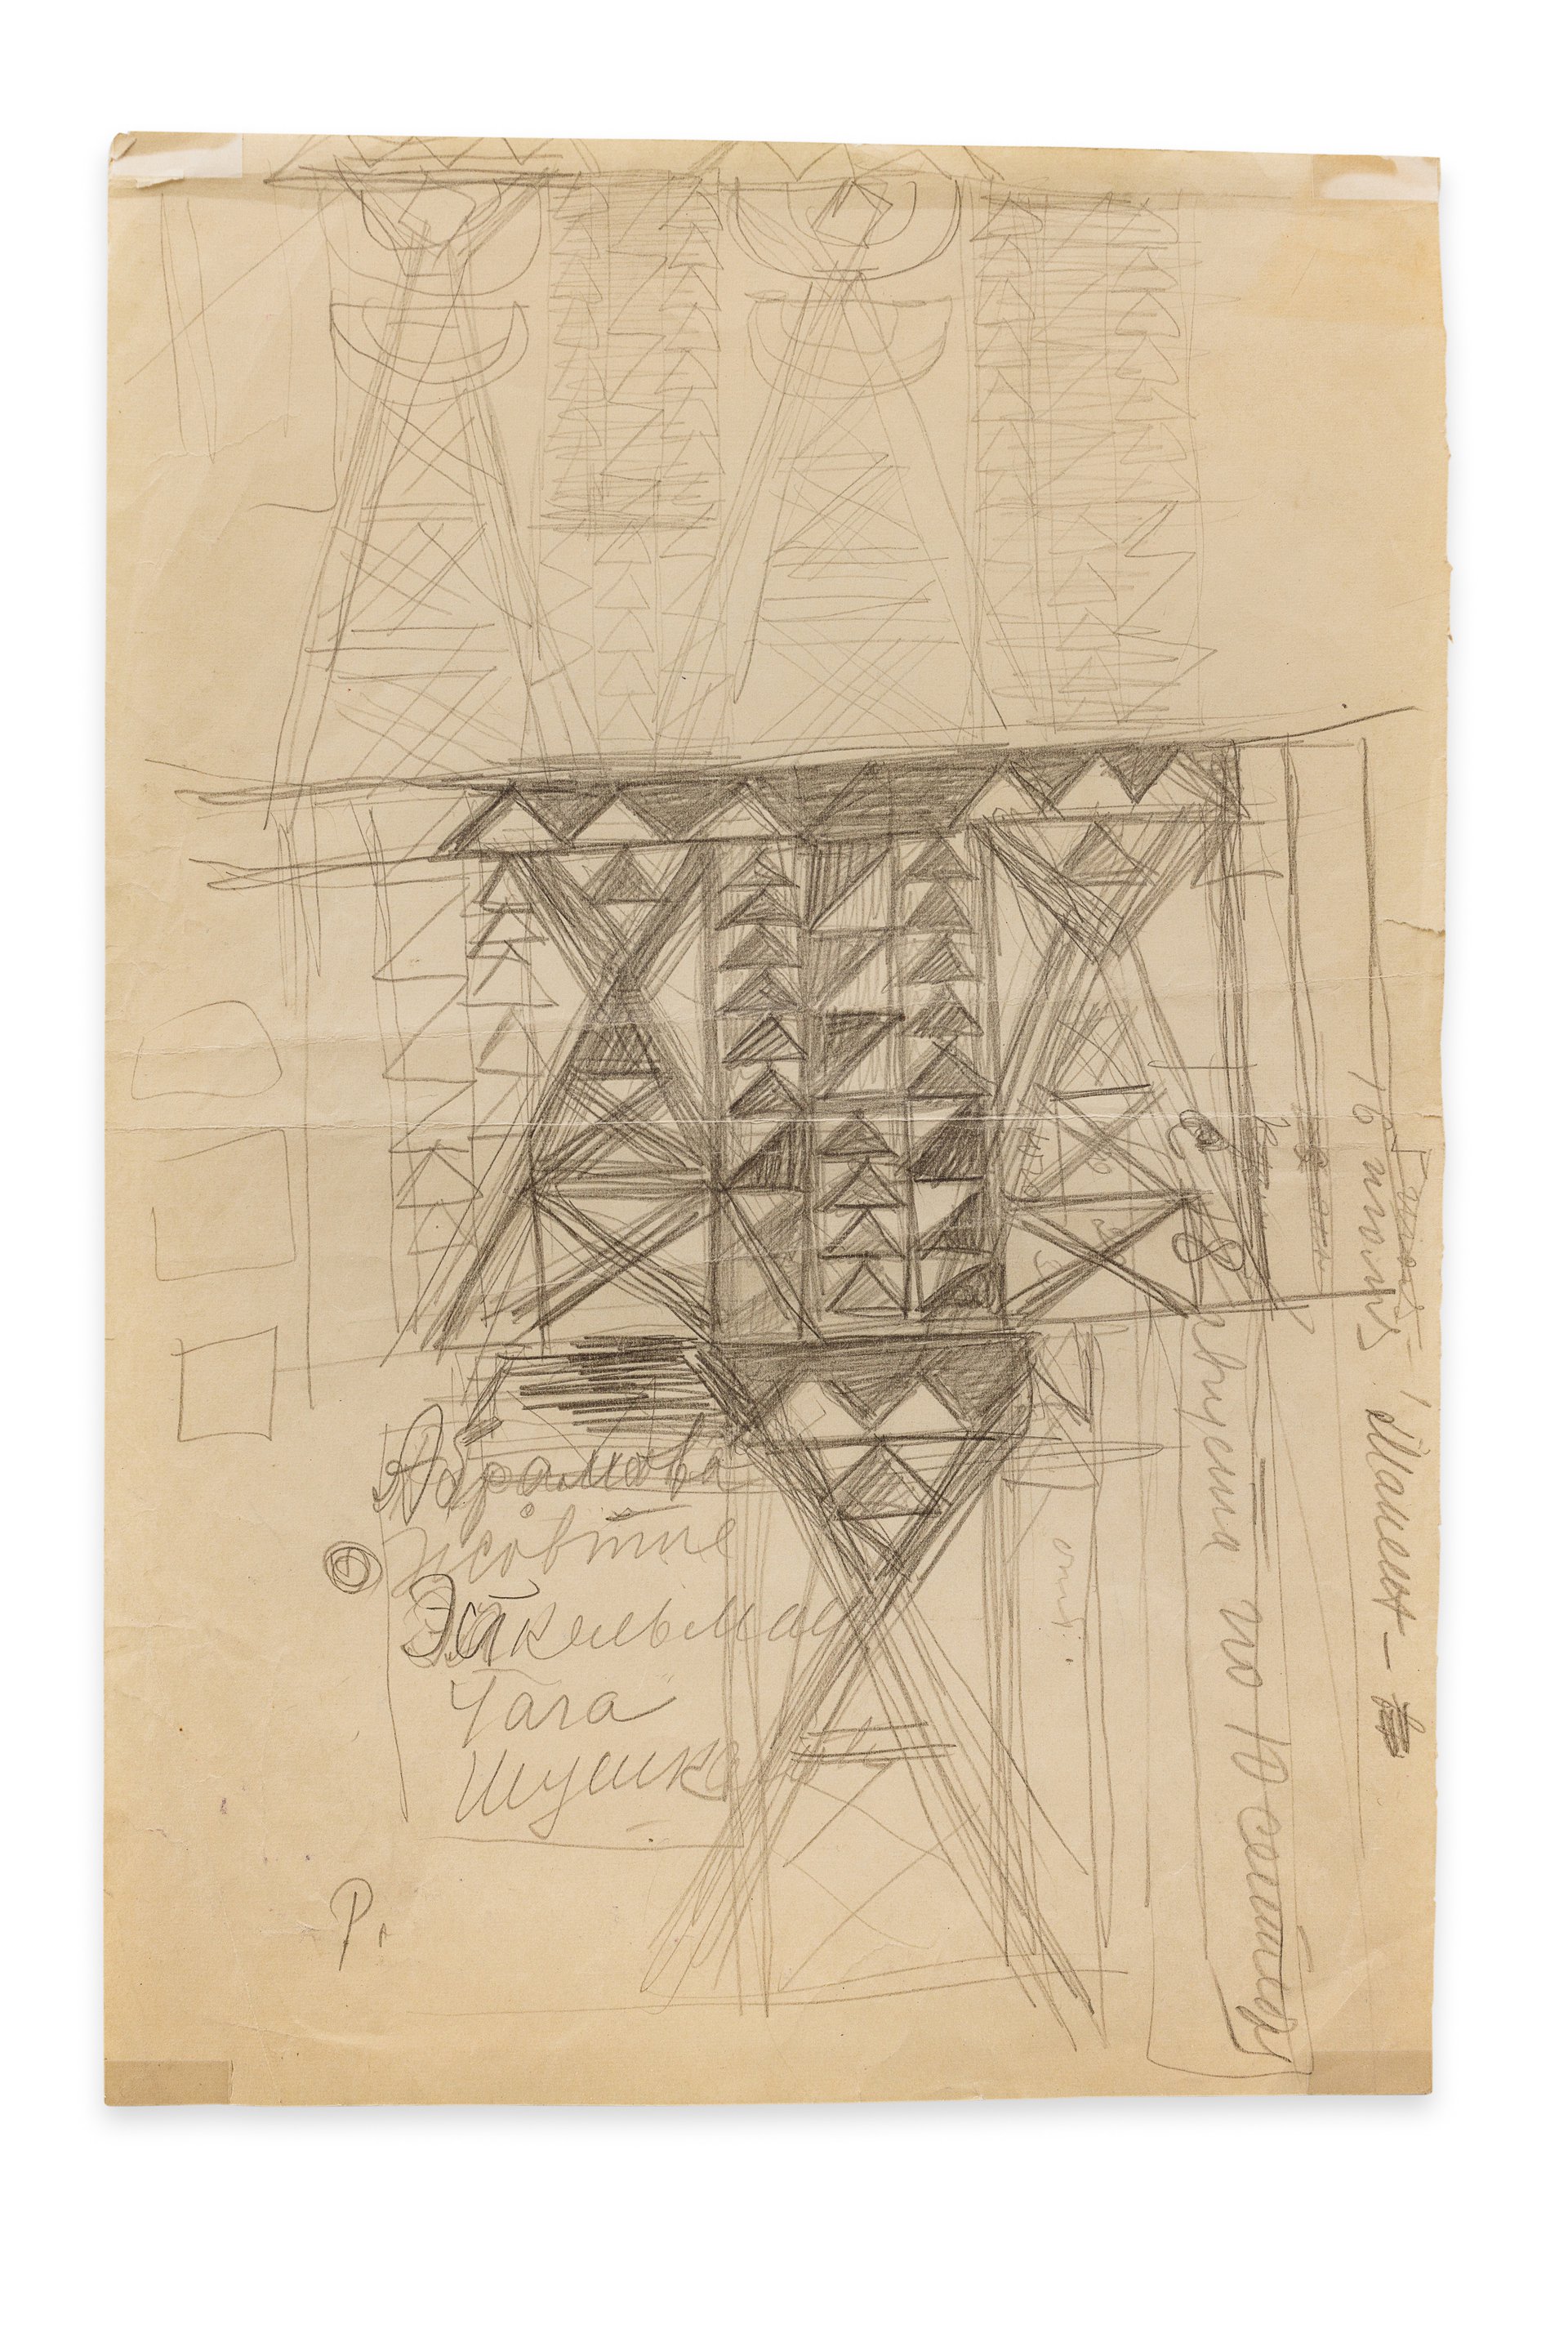 Anna AndreevaElectrification Sketch, 1950sPencil on paper31 x 21 cm